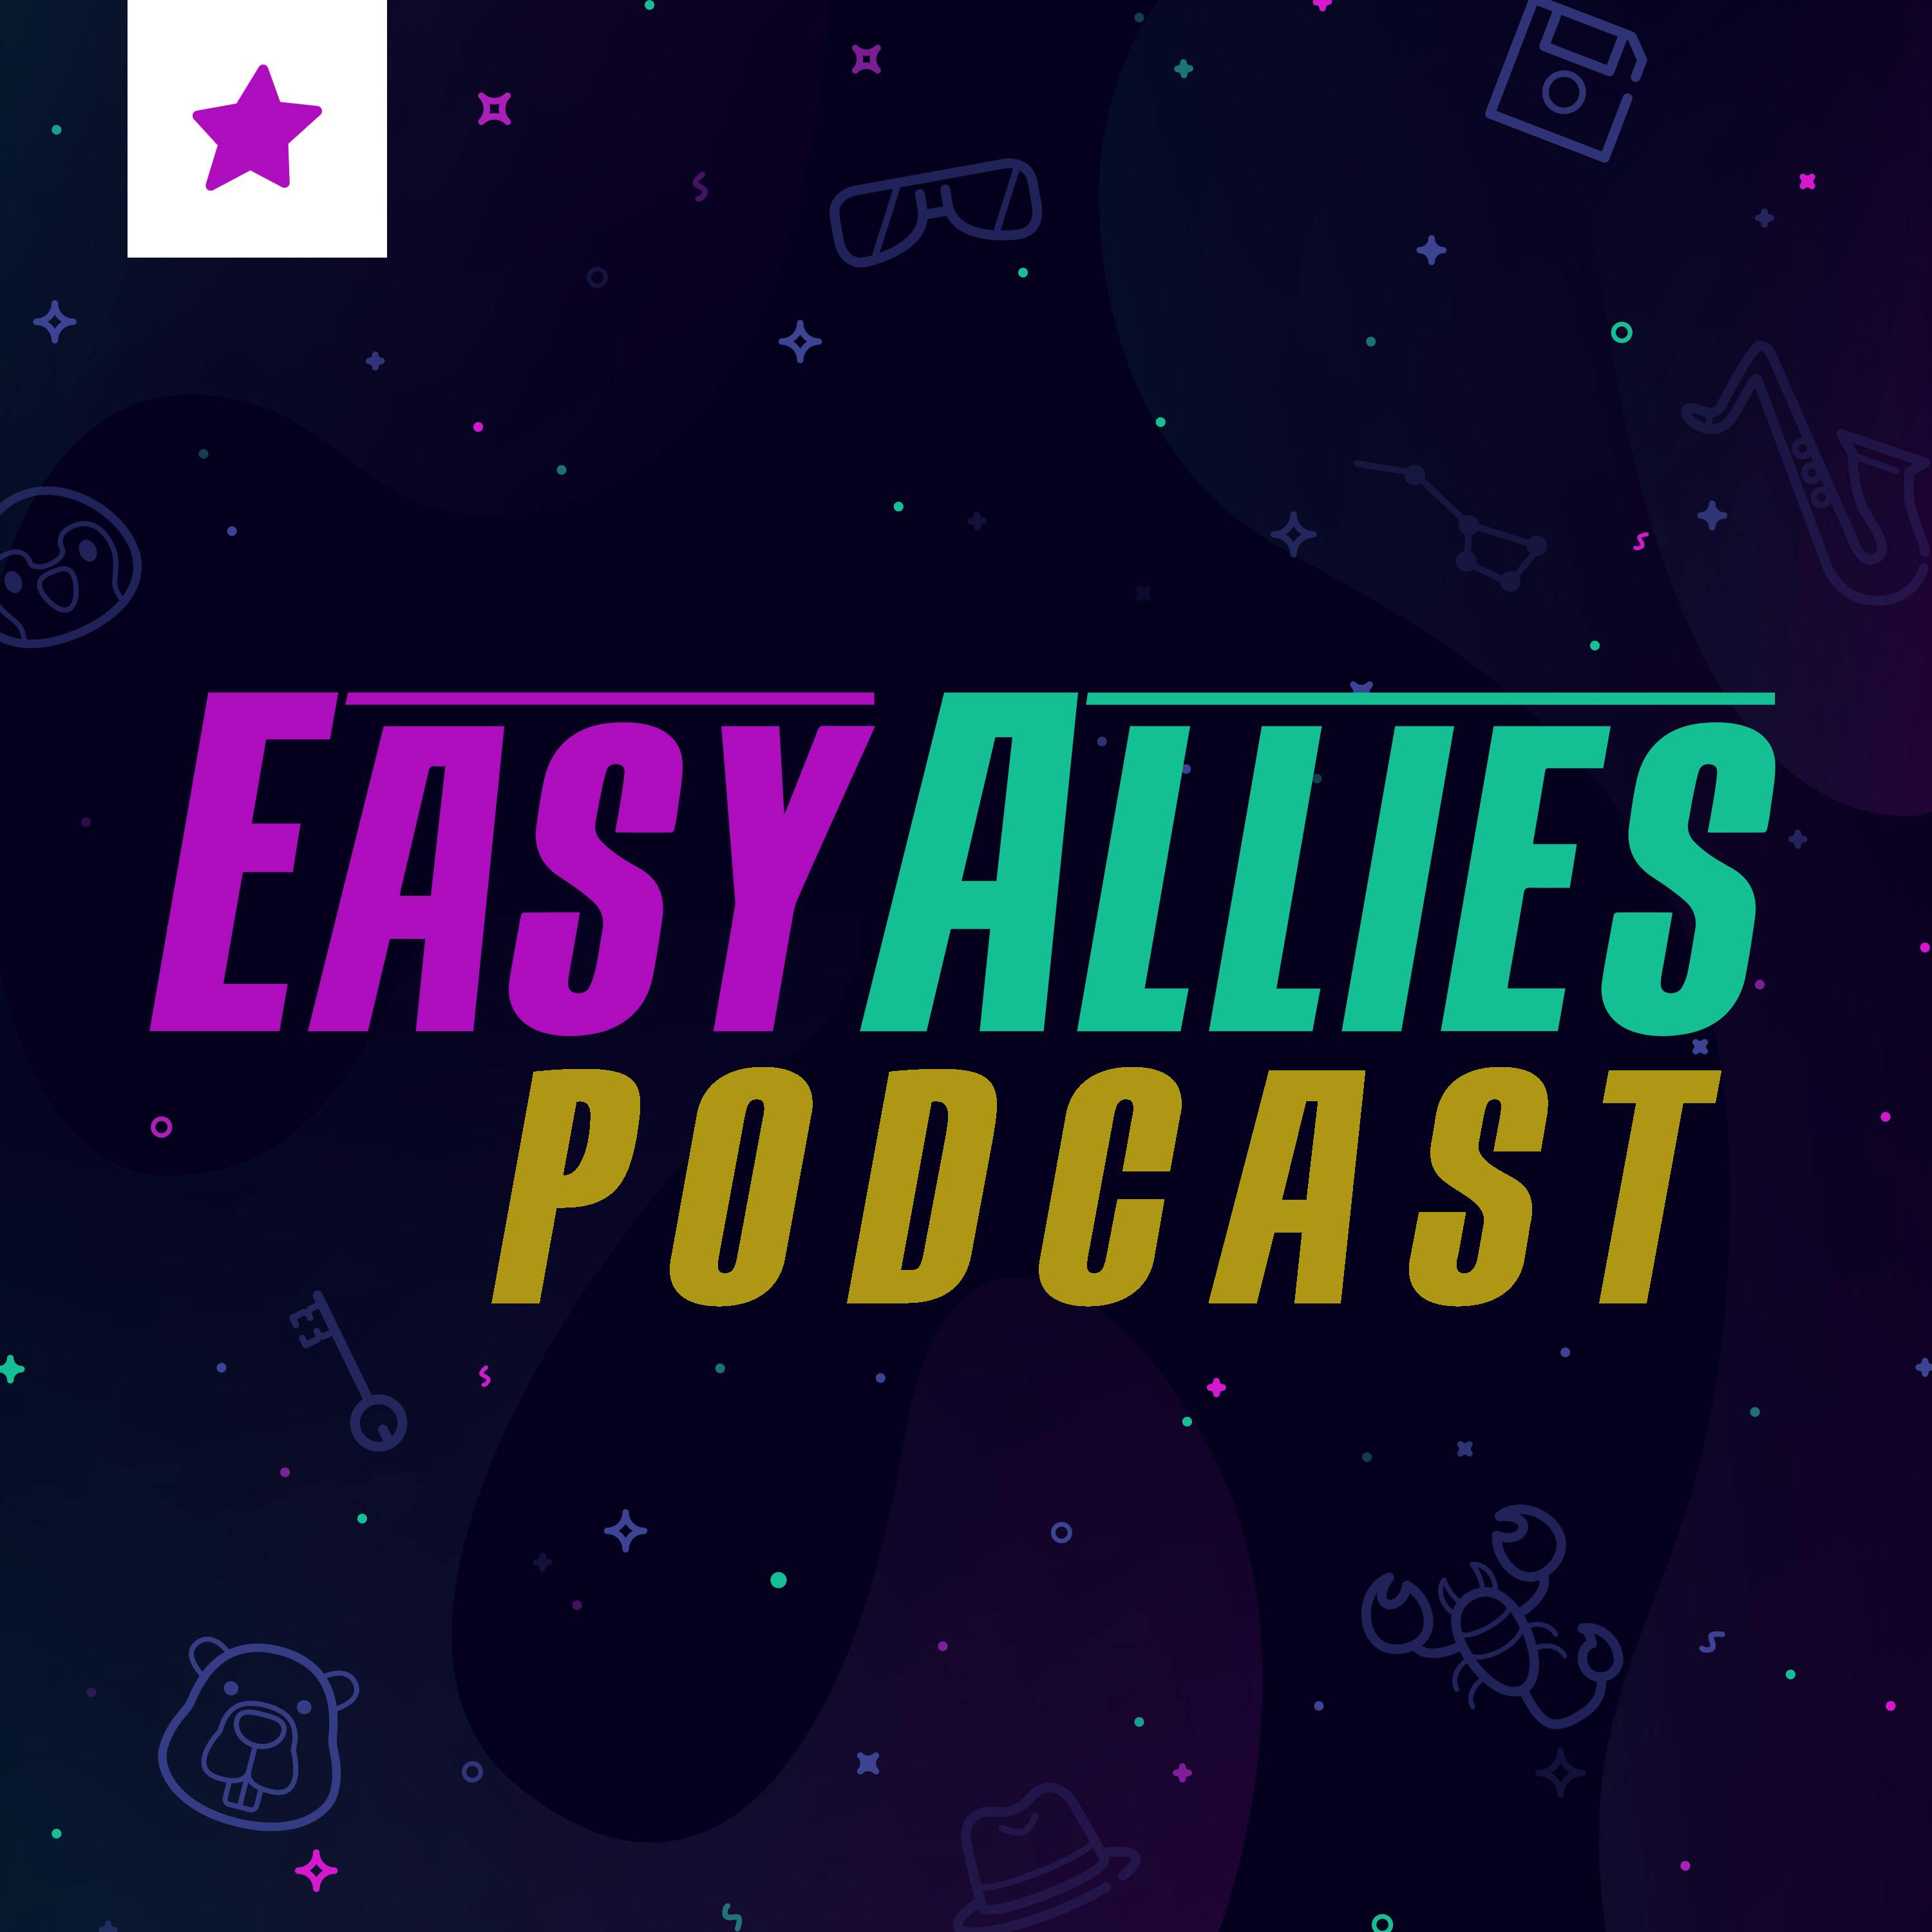 New Year, New Show - Easy Allies Podcast - Jan 12, 2024